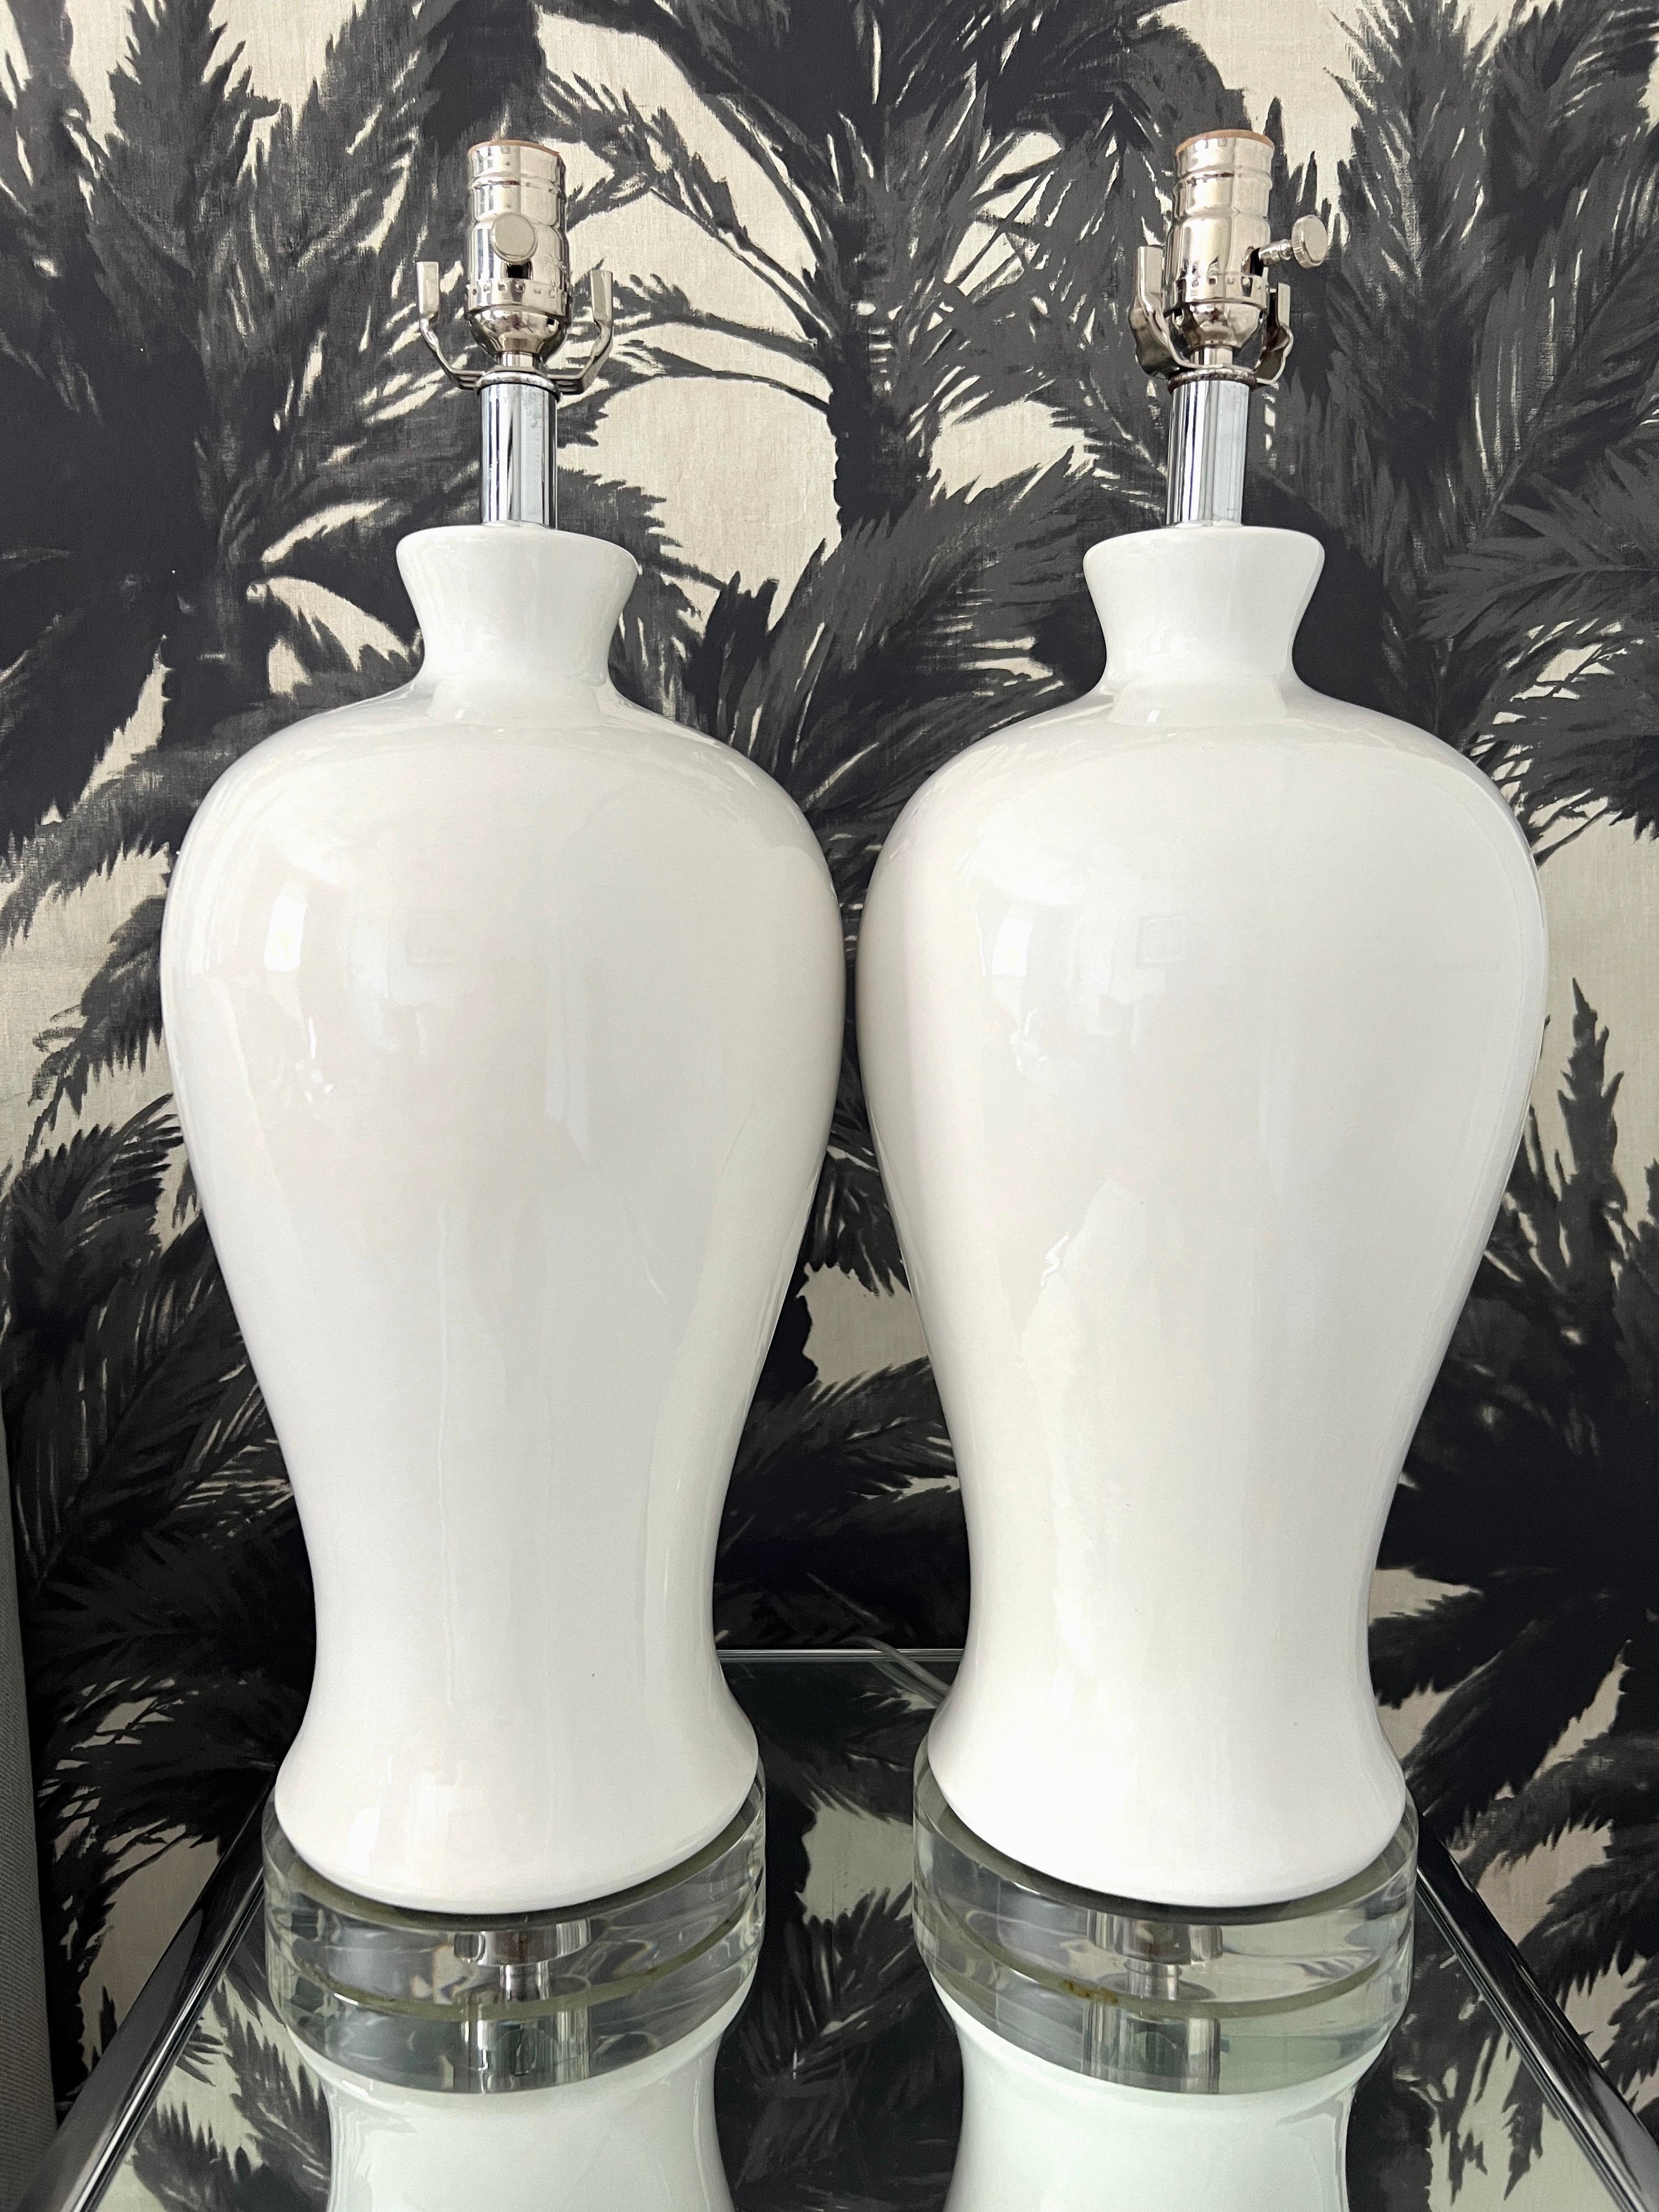 Italian Pair of Modernist Ceramic Urn Lamps in White Glaze with Lucite Bases, c. 1960's For Sale